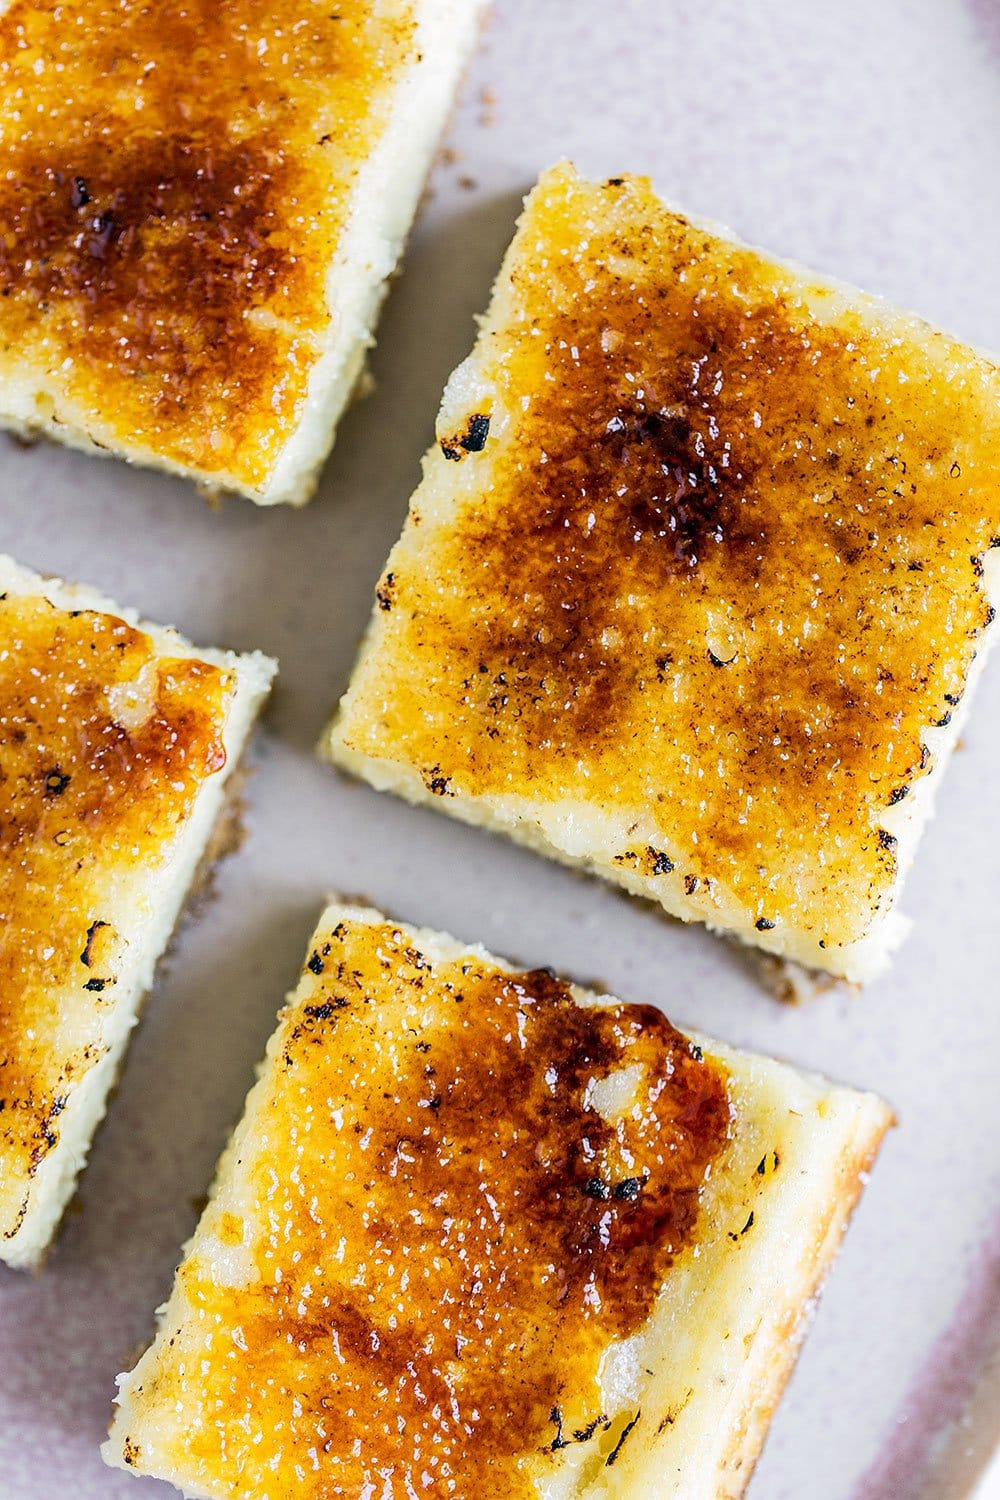 These Creme Brulee Cheesecake Bars turn the classic French dessert into something even easier and tastier! Graham cracker crust, vanilla bean cheesecake filling, and a bruleed sugar topping. YUM!